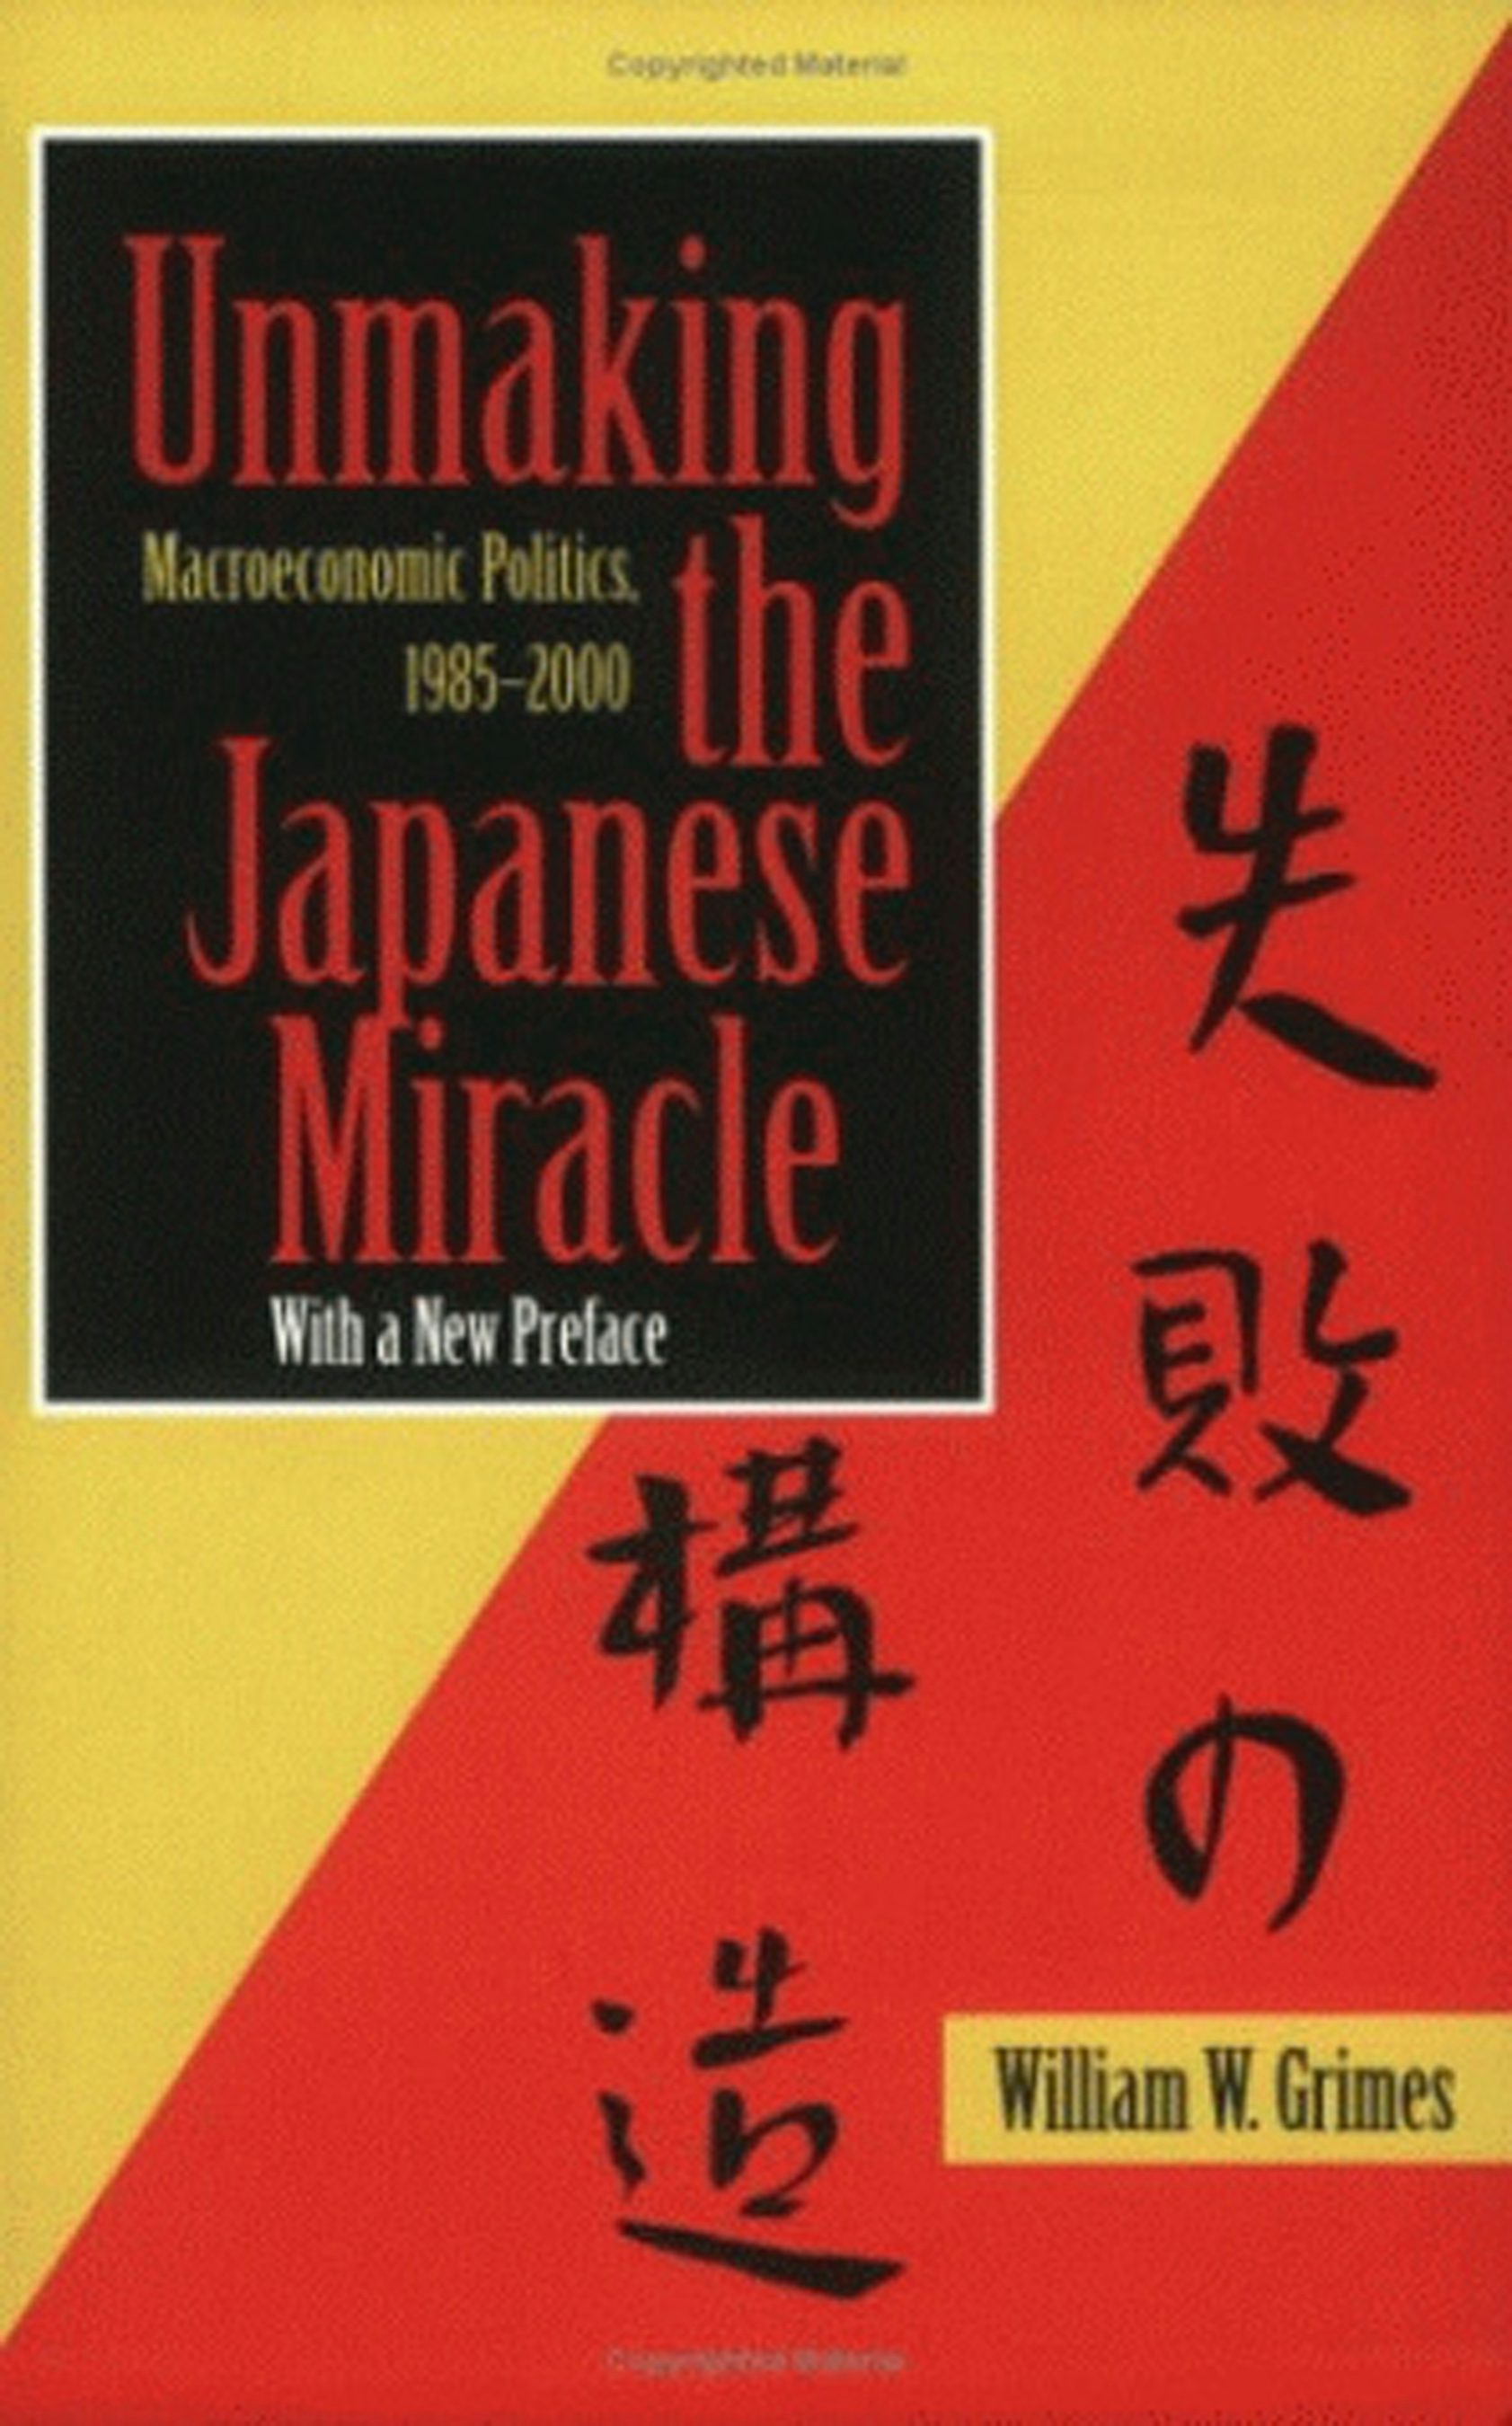 Unmaking the Japanese Miracle by William M. Grimes | Hardcover 